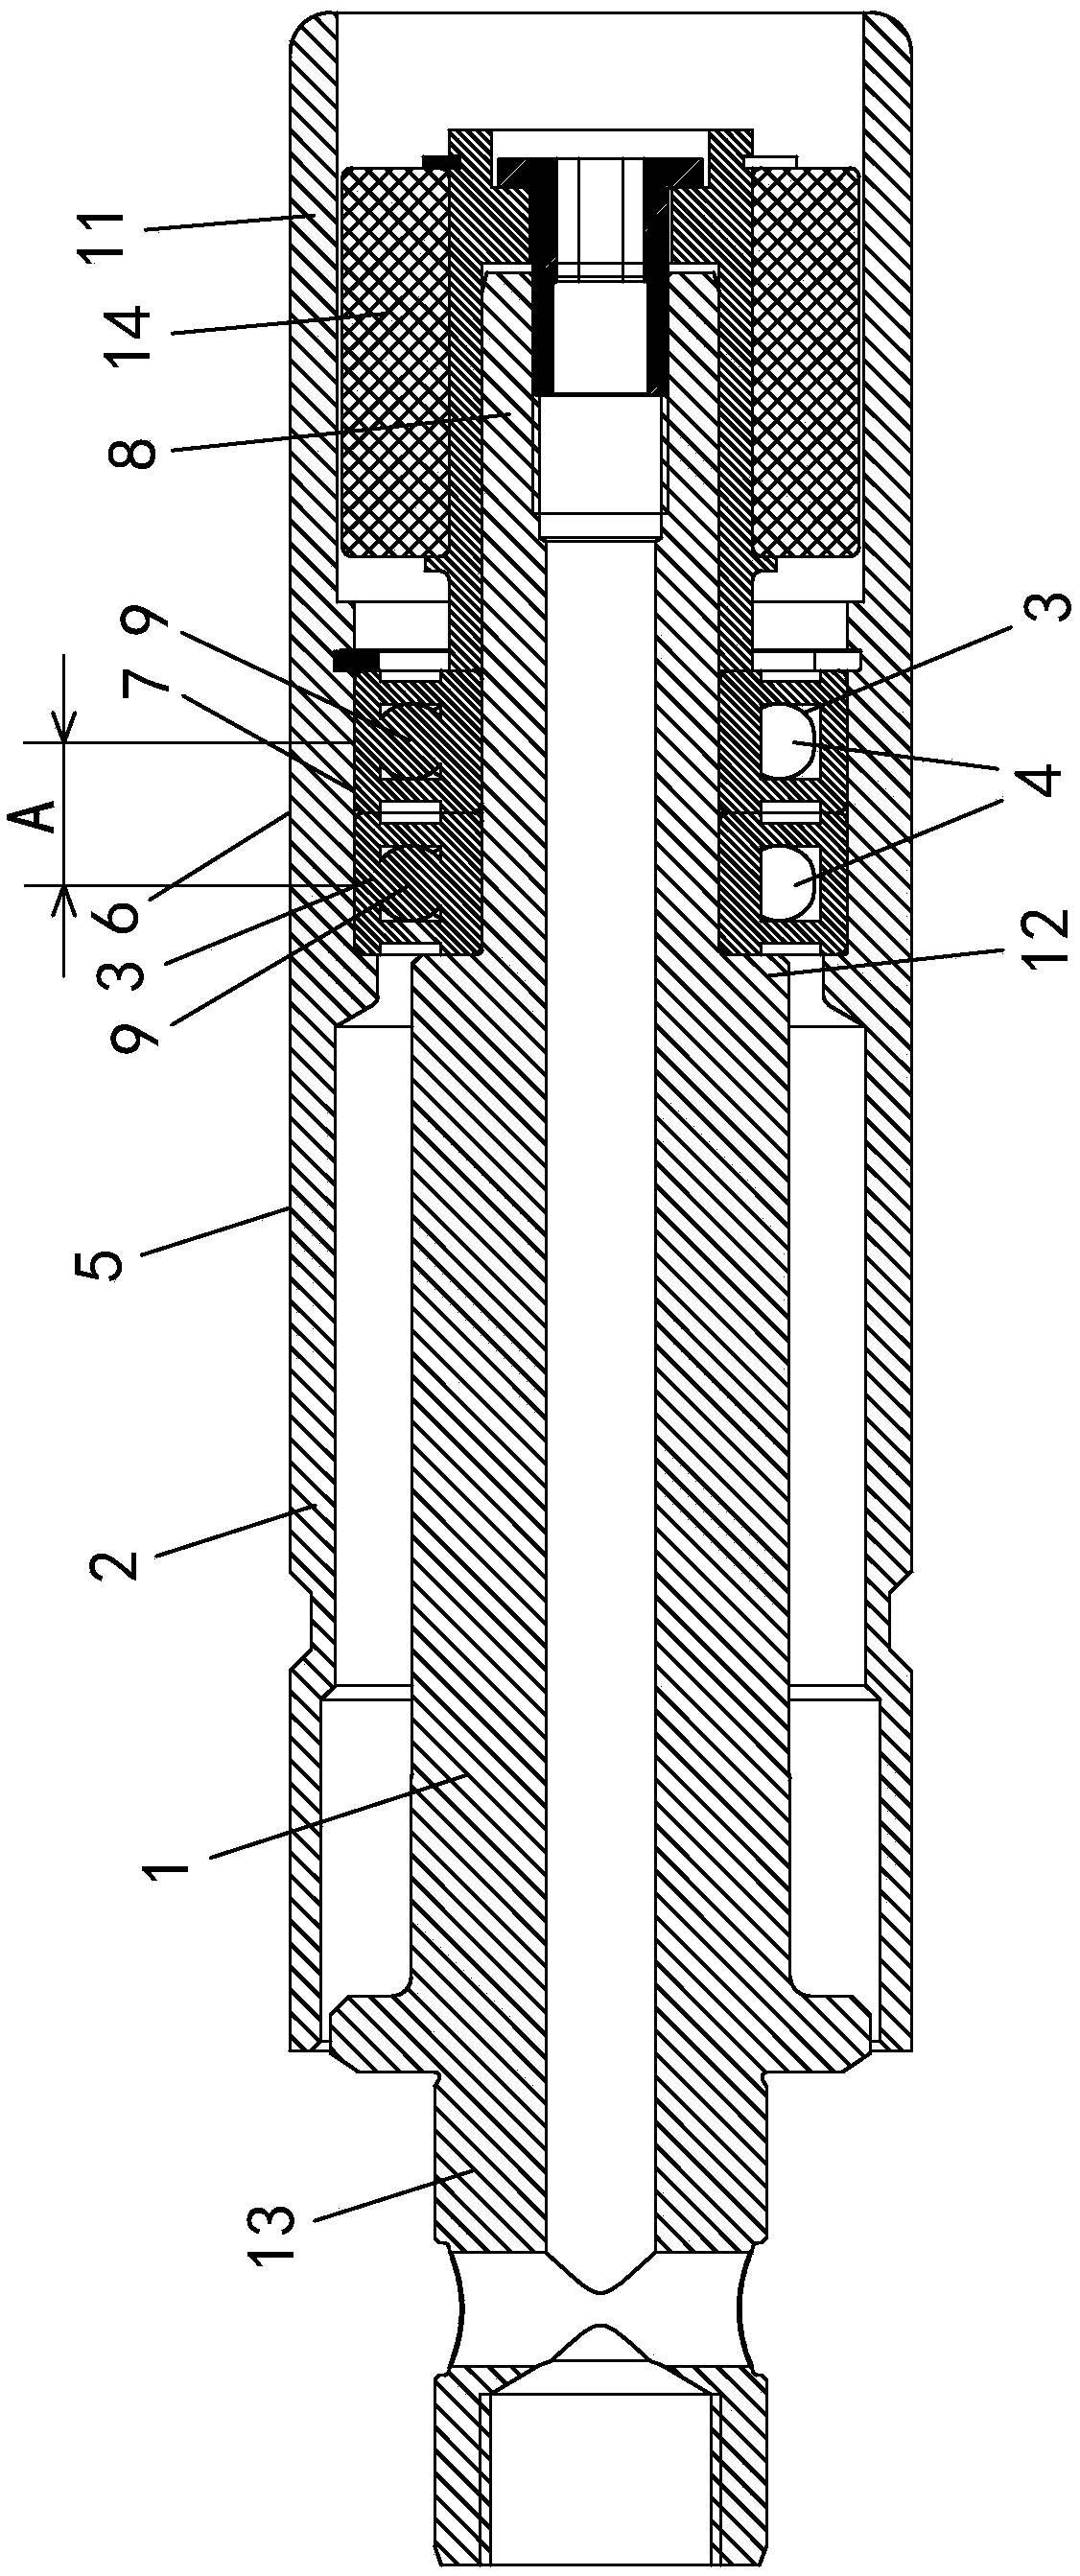 Core rod structure for floating supporting of metal hollow body